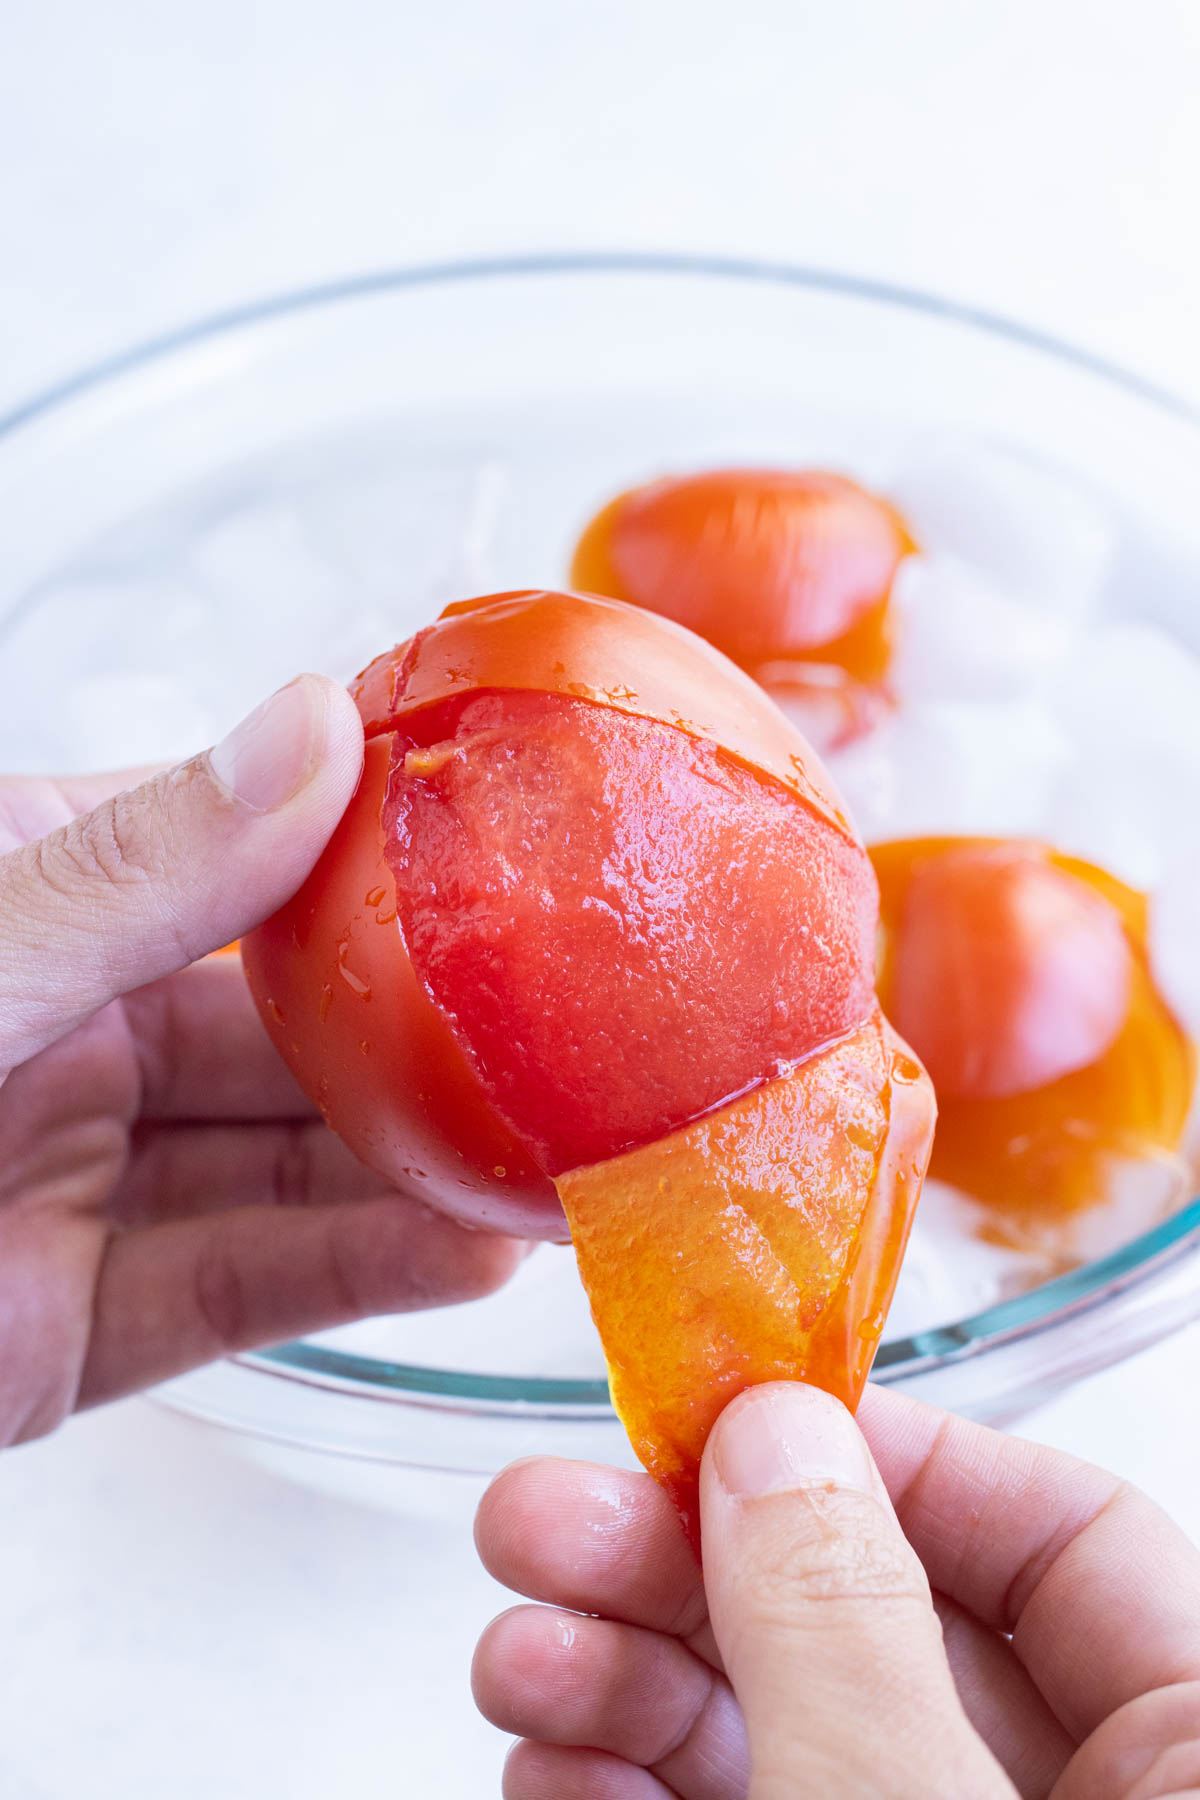 You can easily peel the skin off of a tomato.